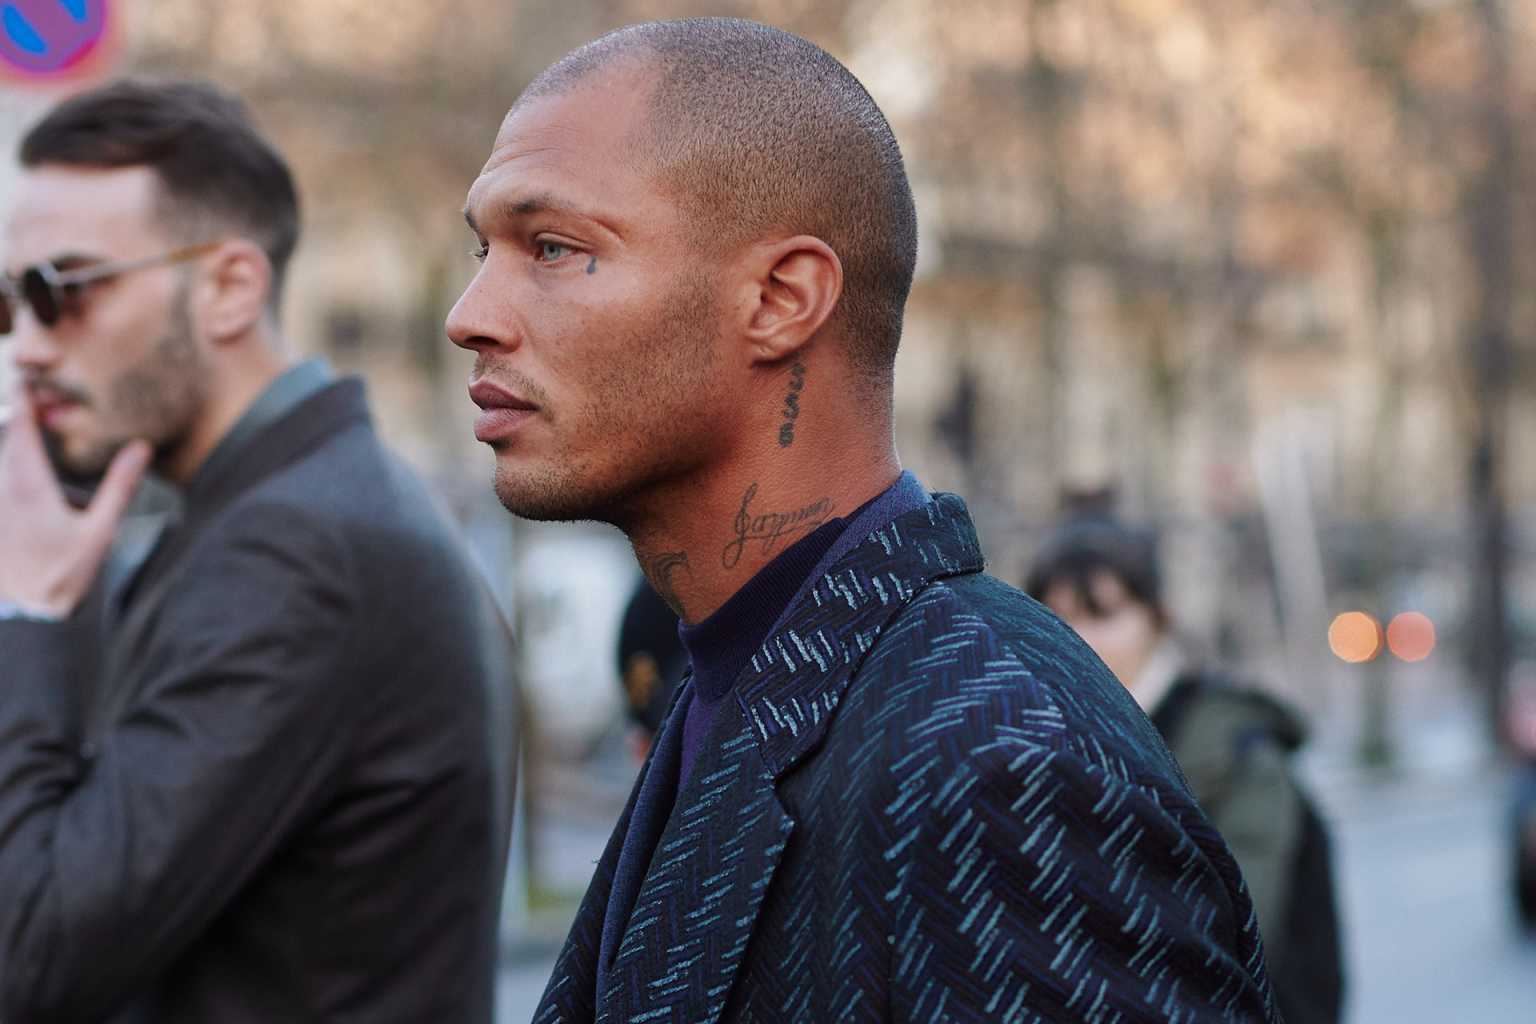 The Best Tattoo Ideas For Men, According To A Celebrity Tattoo